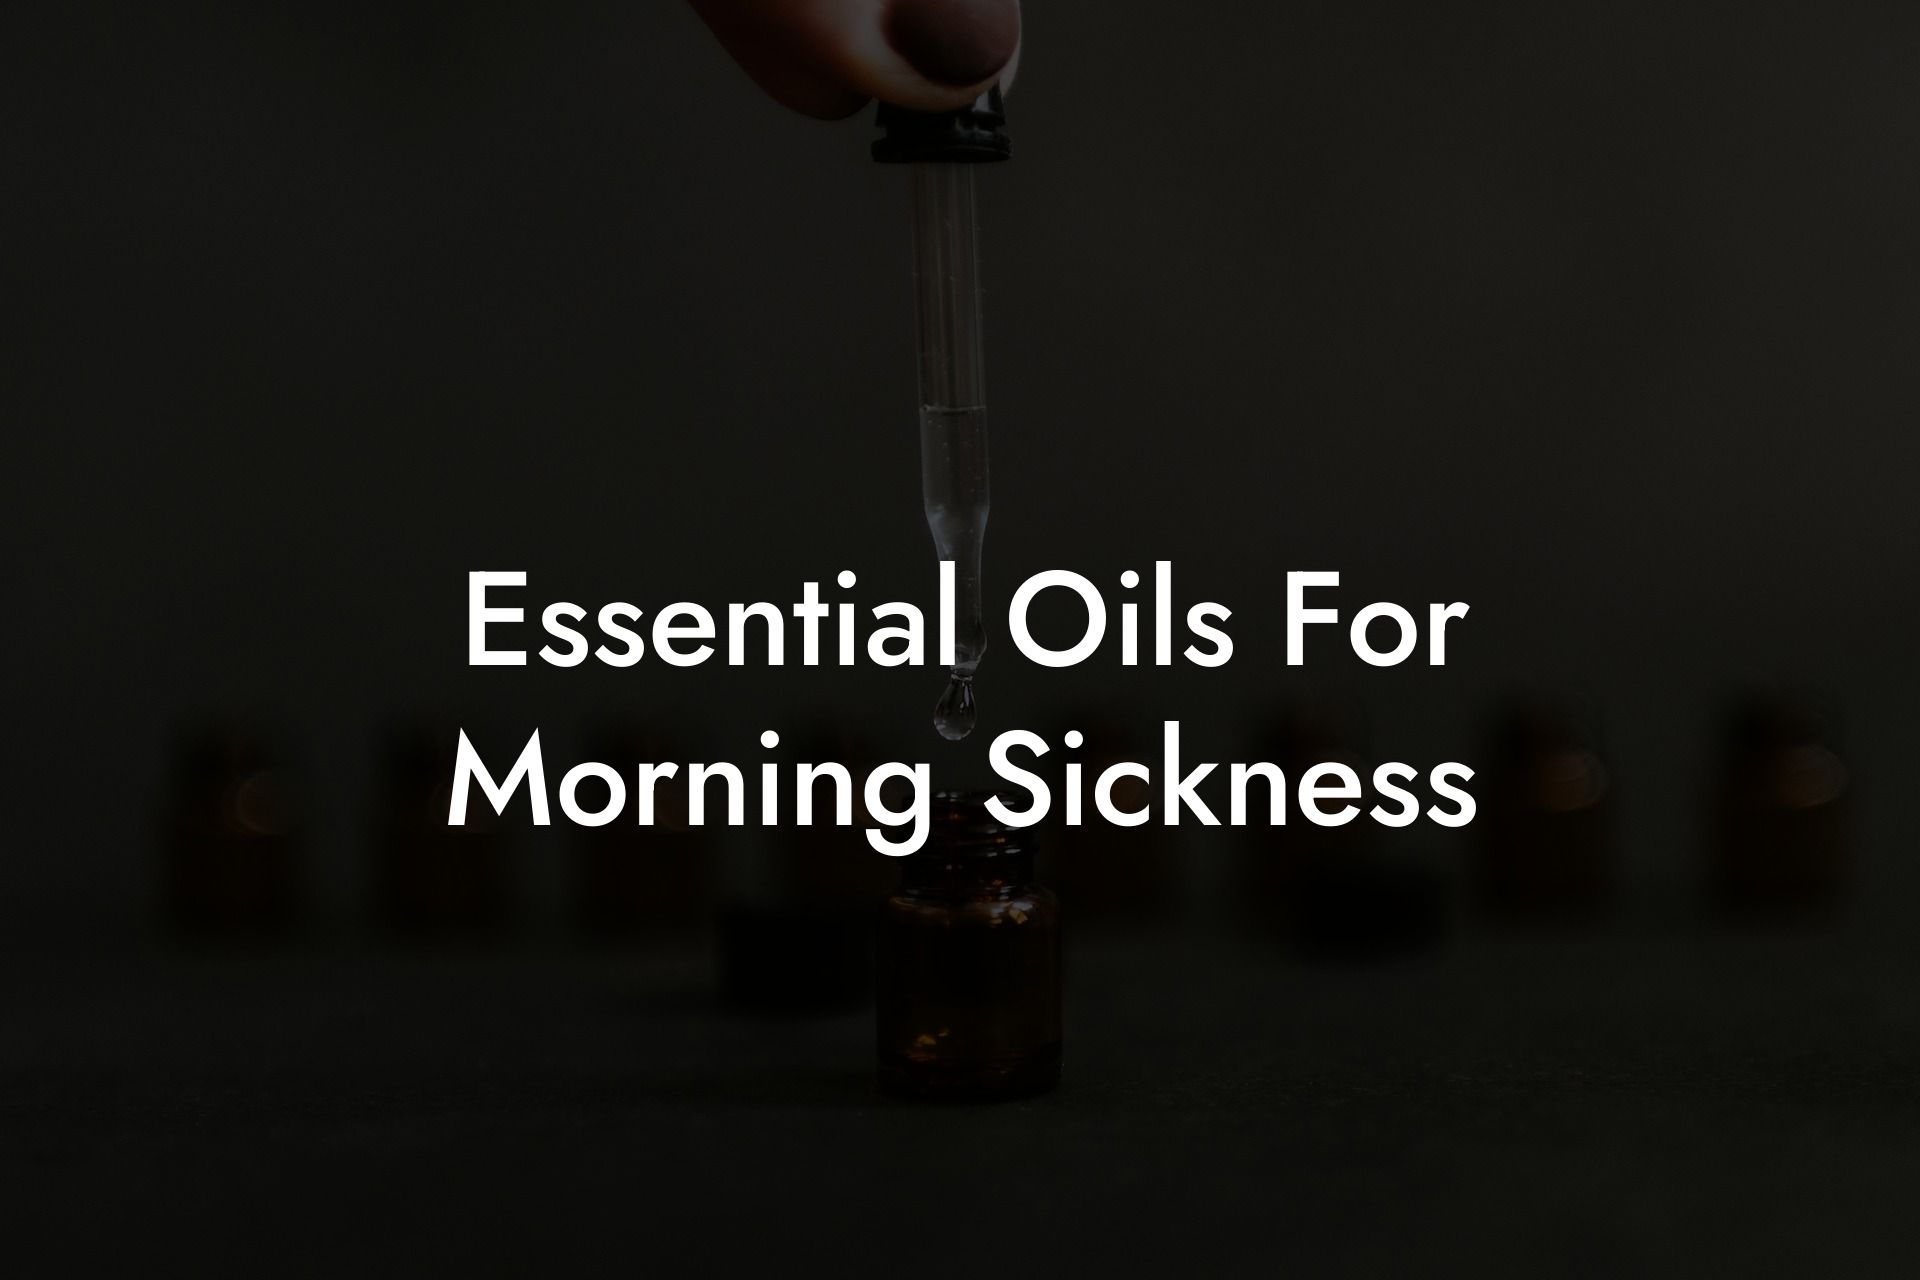 Essential Oils For Morning Sickness